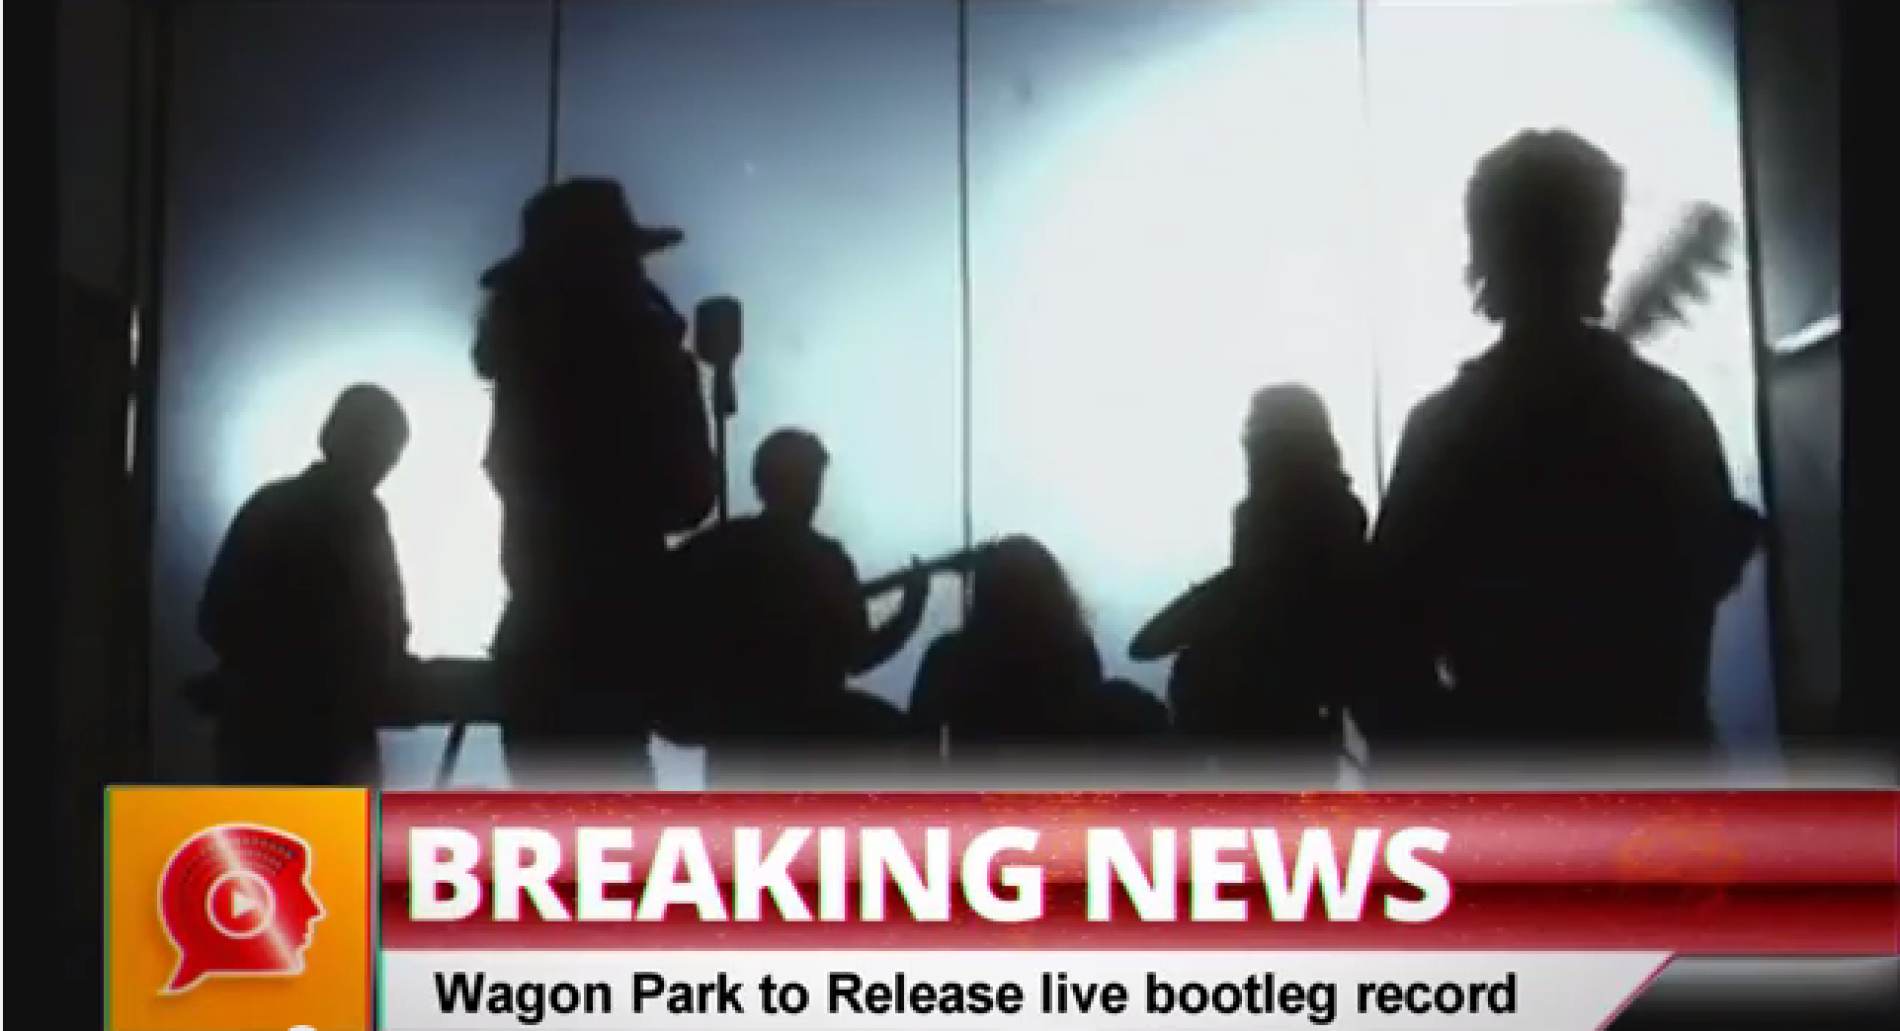 Wagon Park To Release A LIVE Bootleg Record